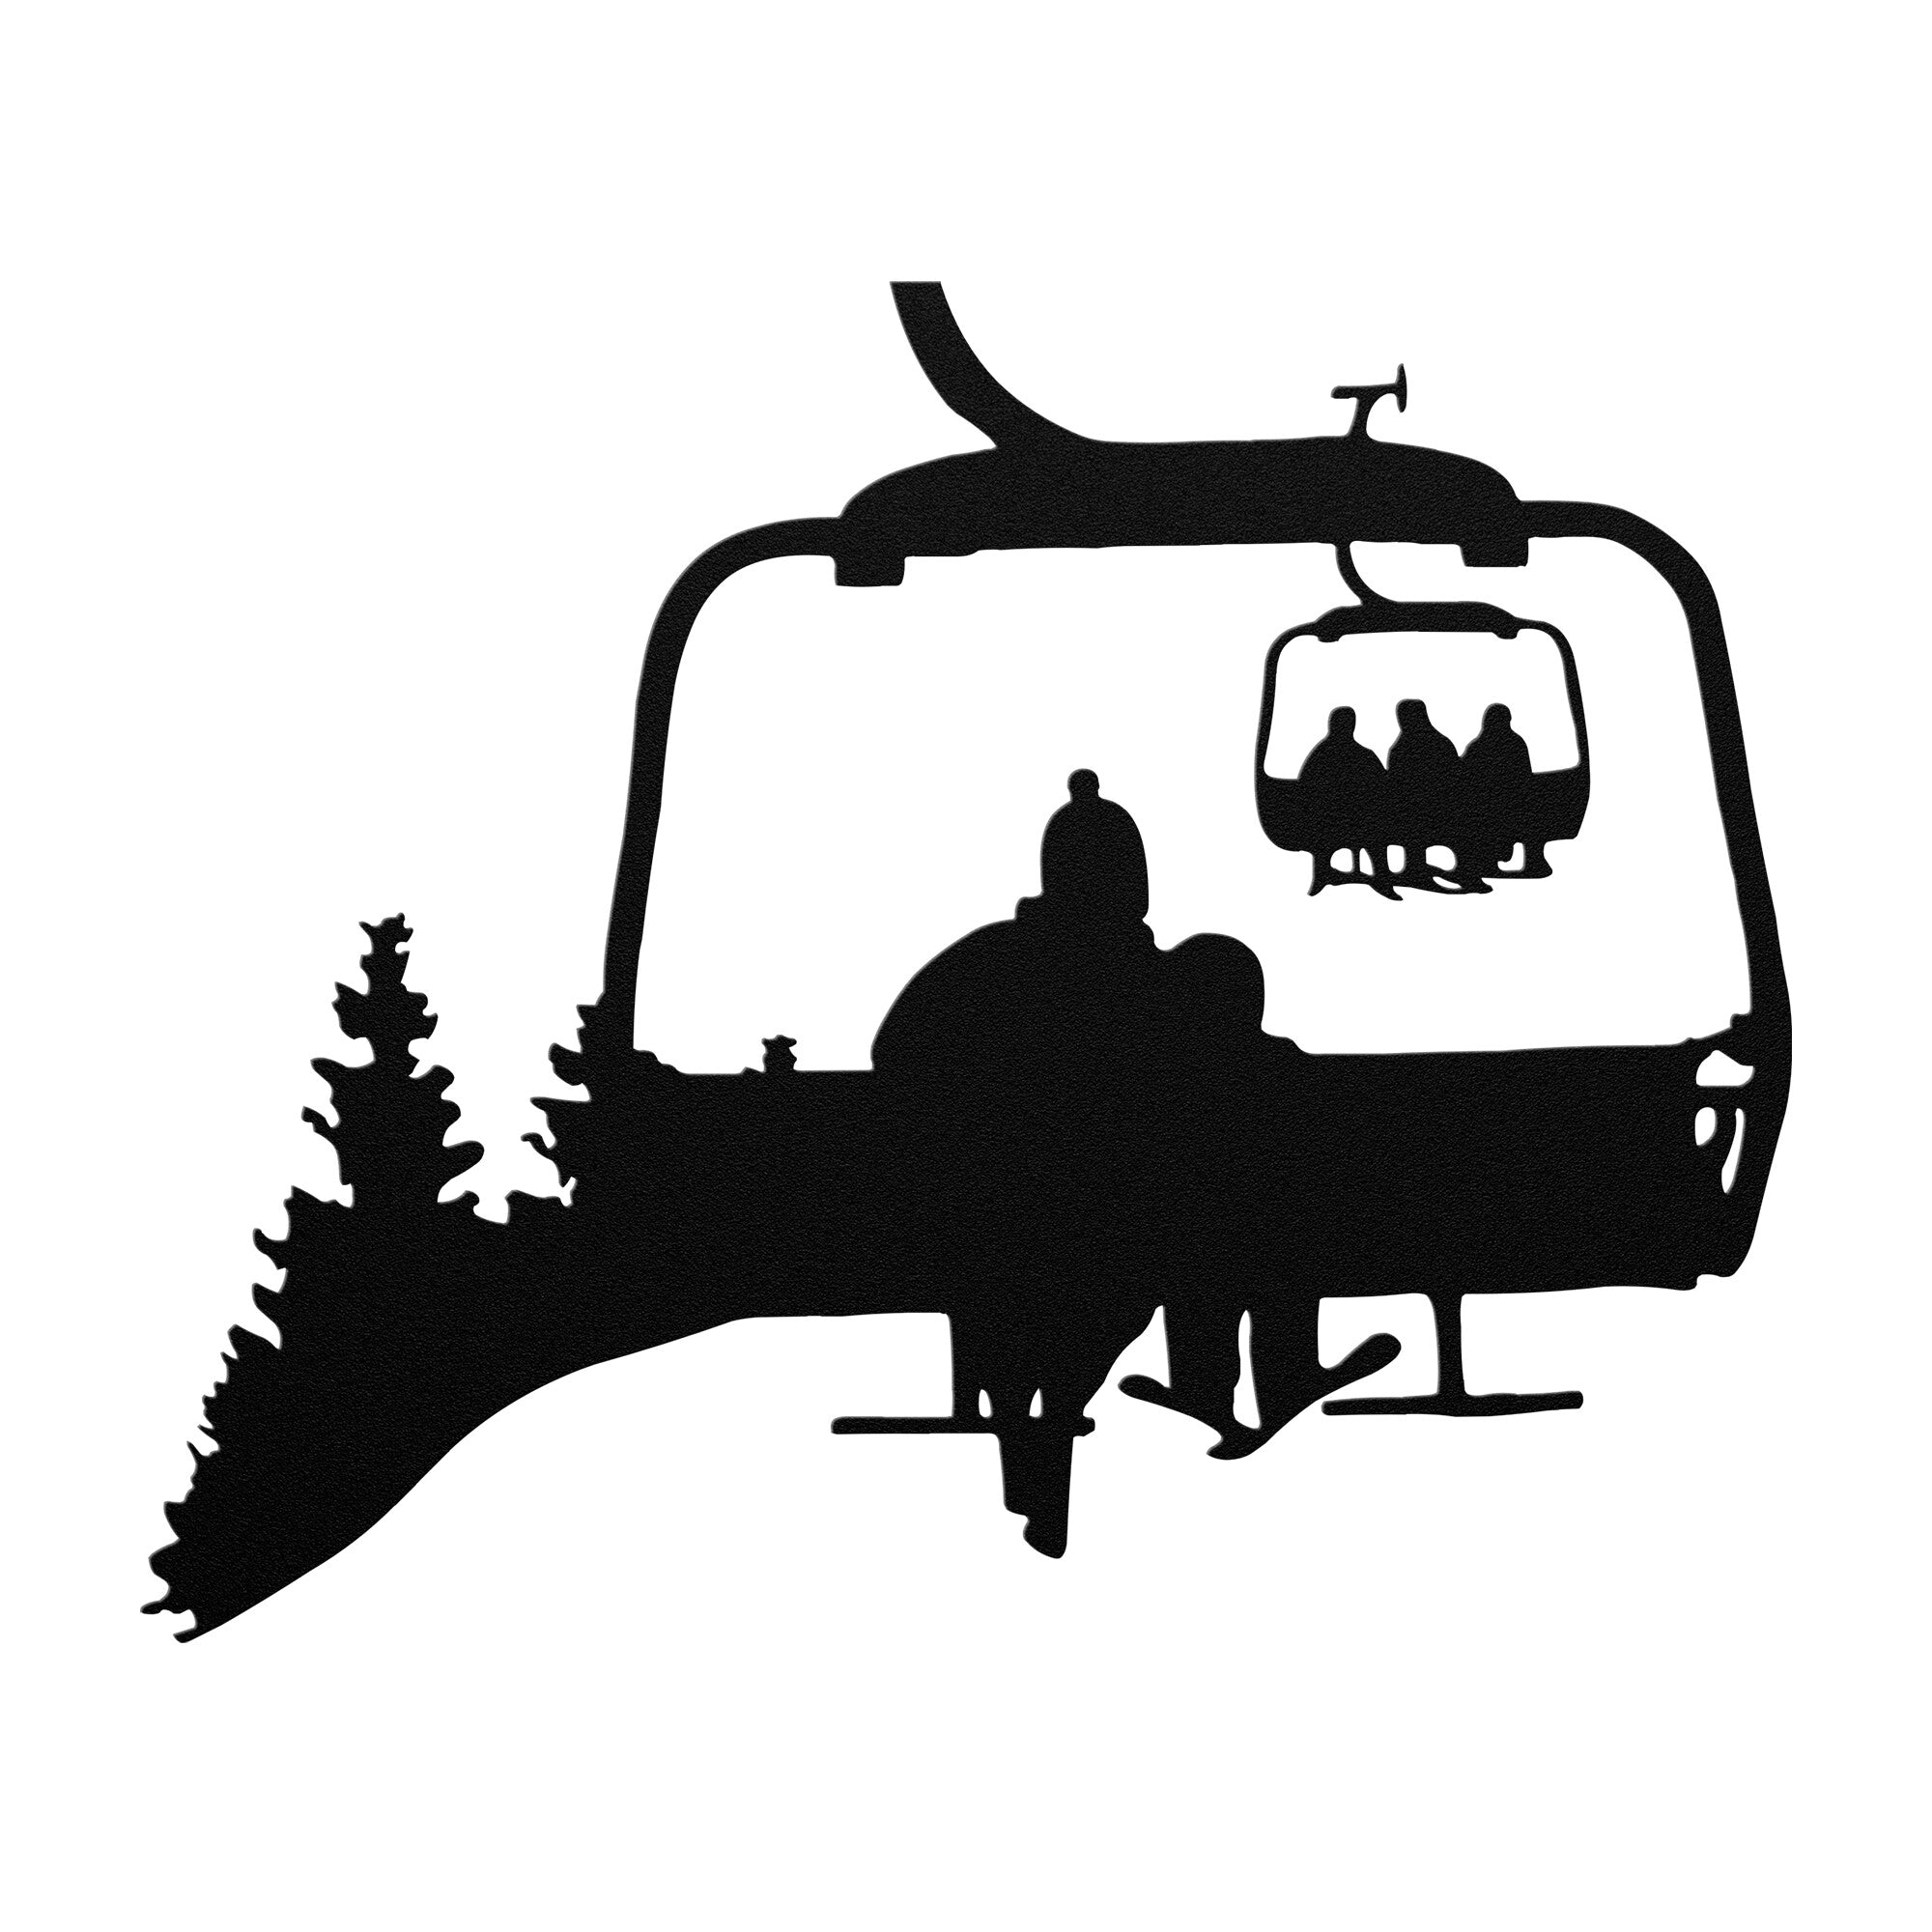 PERSONALIZED CHAIRLIFT SKIING FAMILY METAL WALL ART, 1 SKIING PARENT, 1 SKIING CHILD  (🇺🇸 MADE IN THE USA)